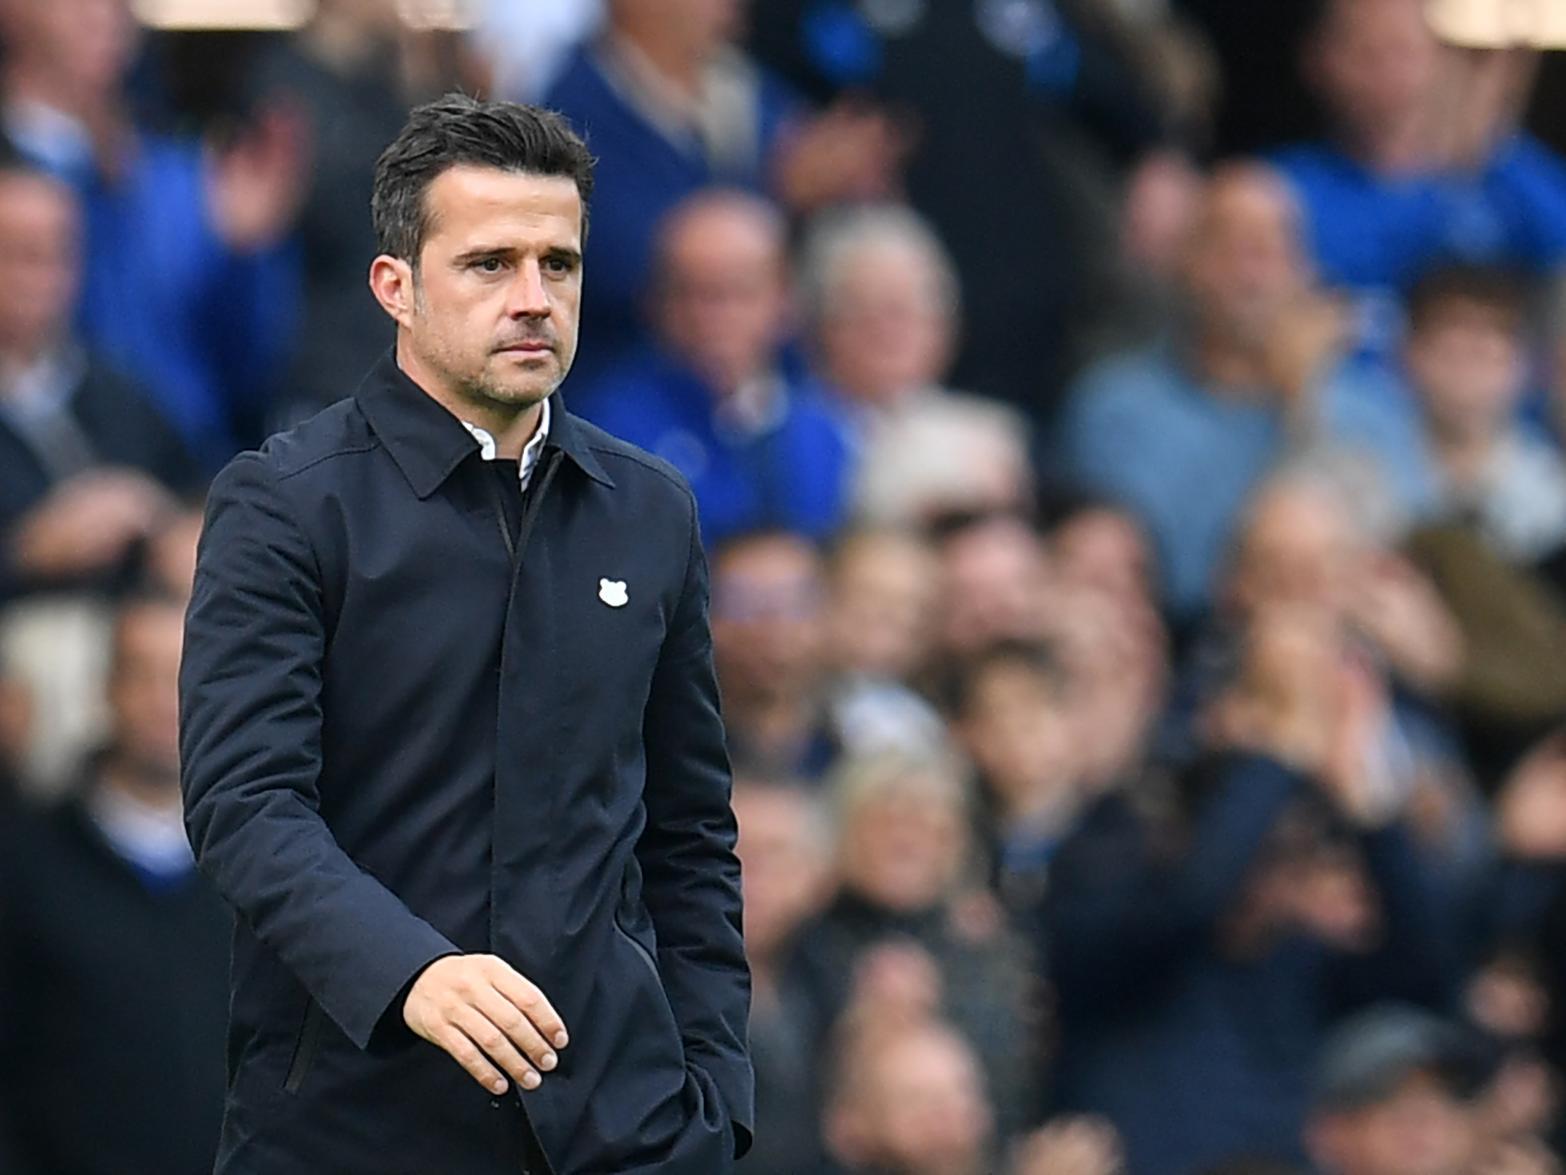 The Toffees simply have to beat Norwich this weekend. After that, it's Leicester, Liverpool, Chelsea, Manchester United and Arsenal. No pressure then, Marco Silva...